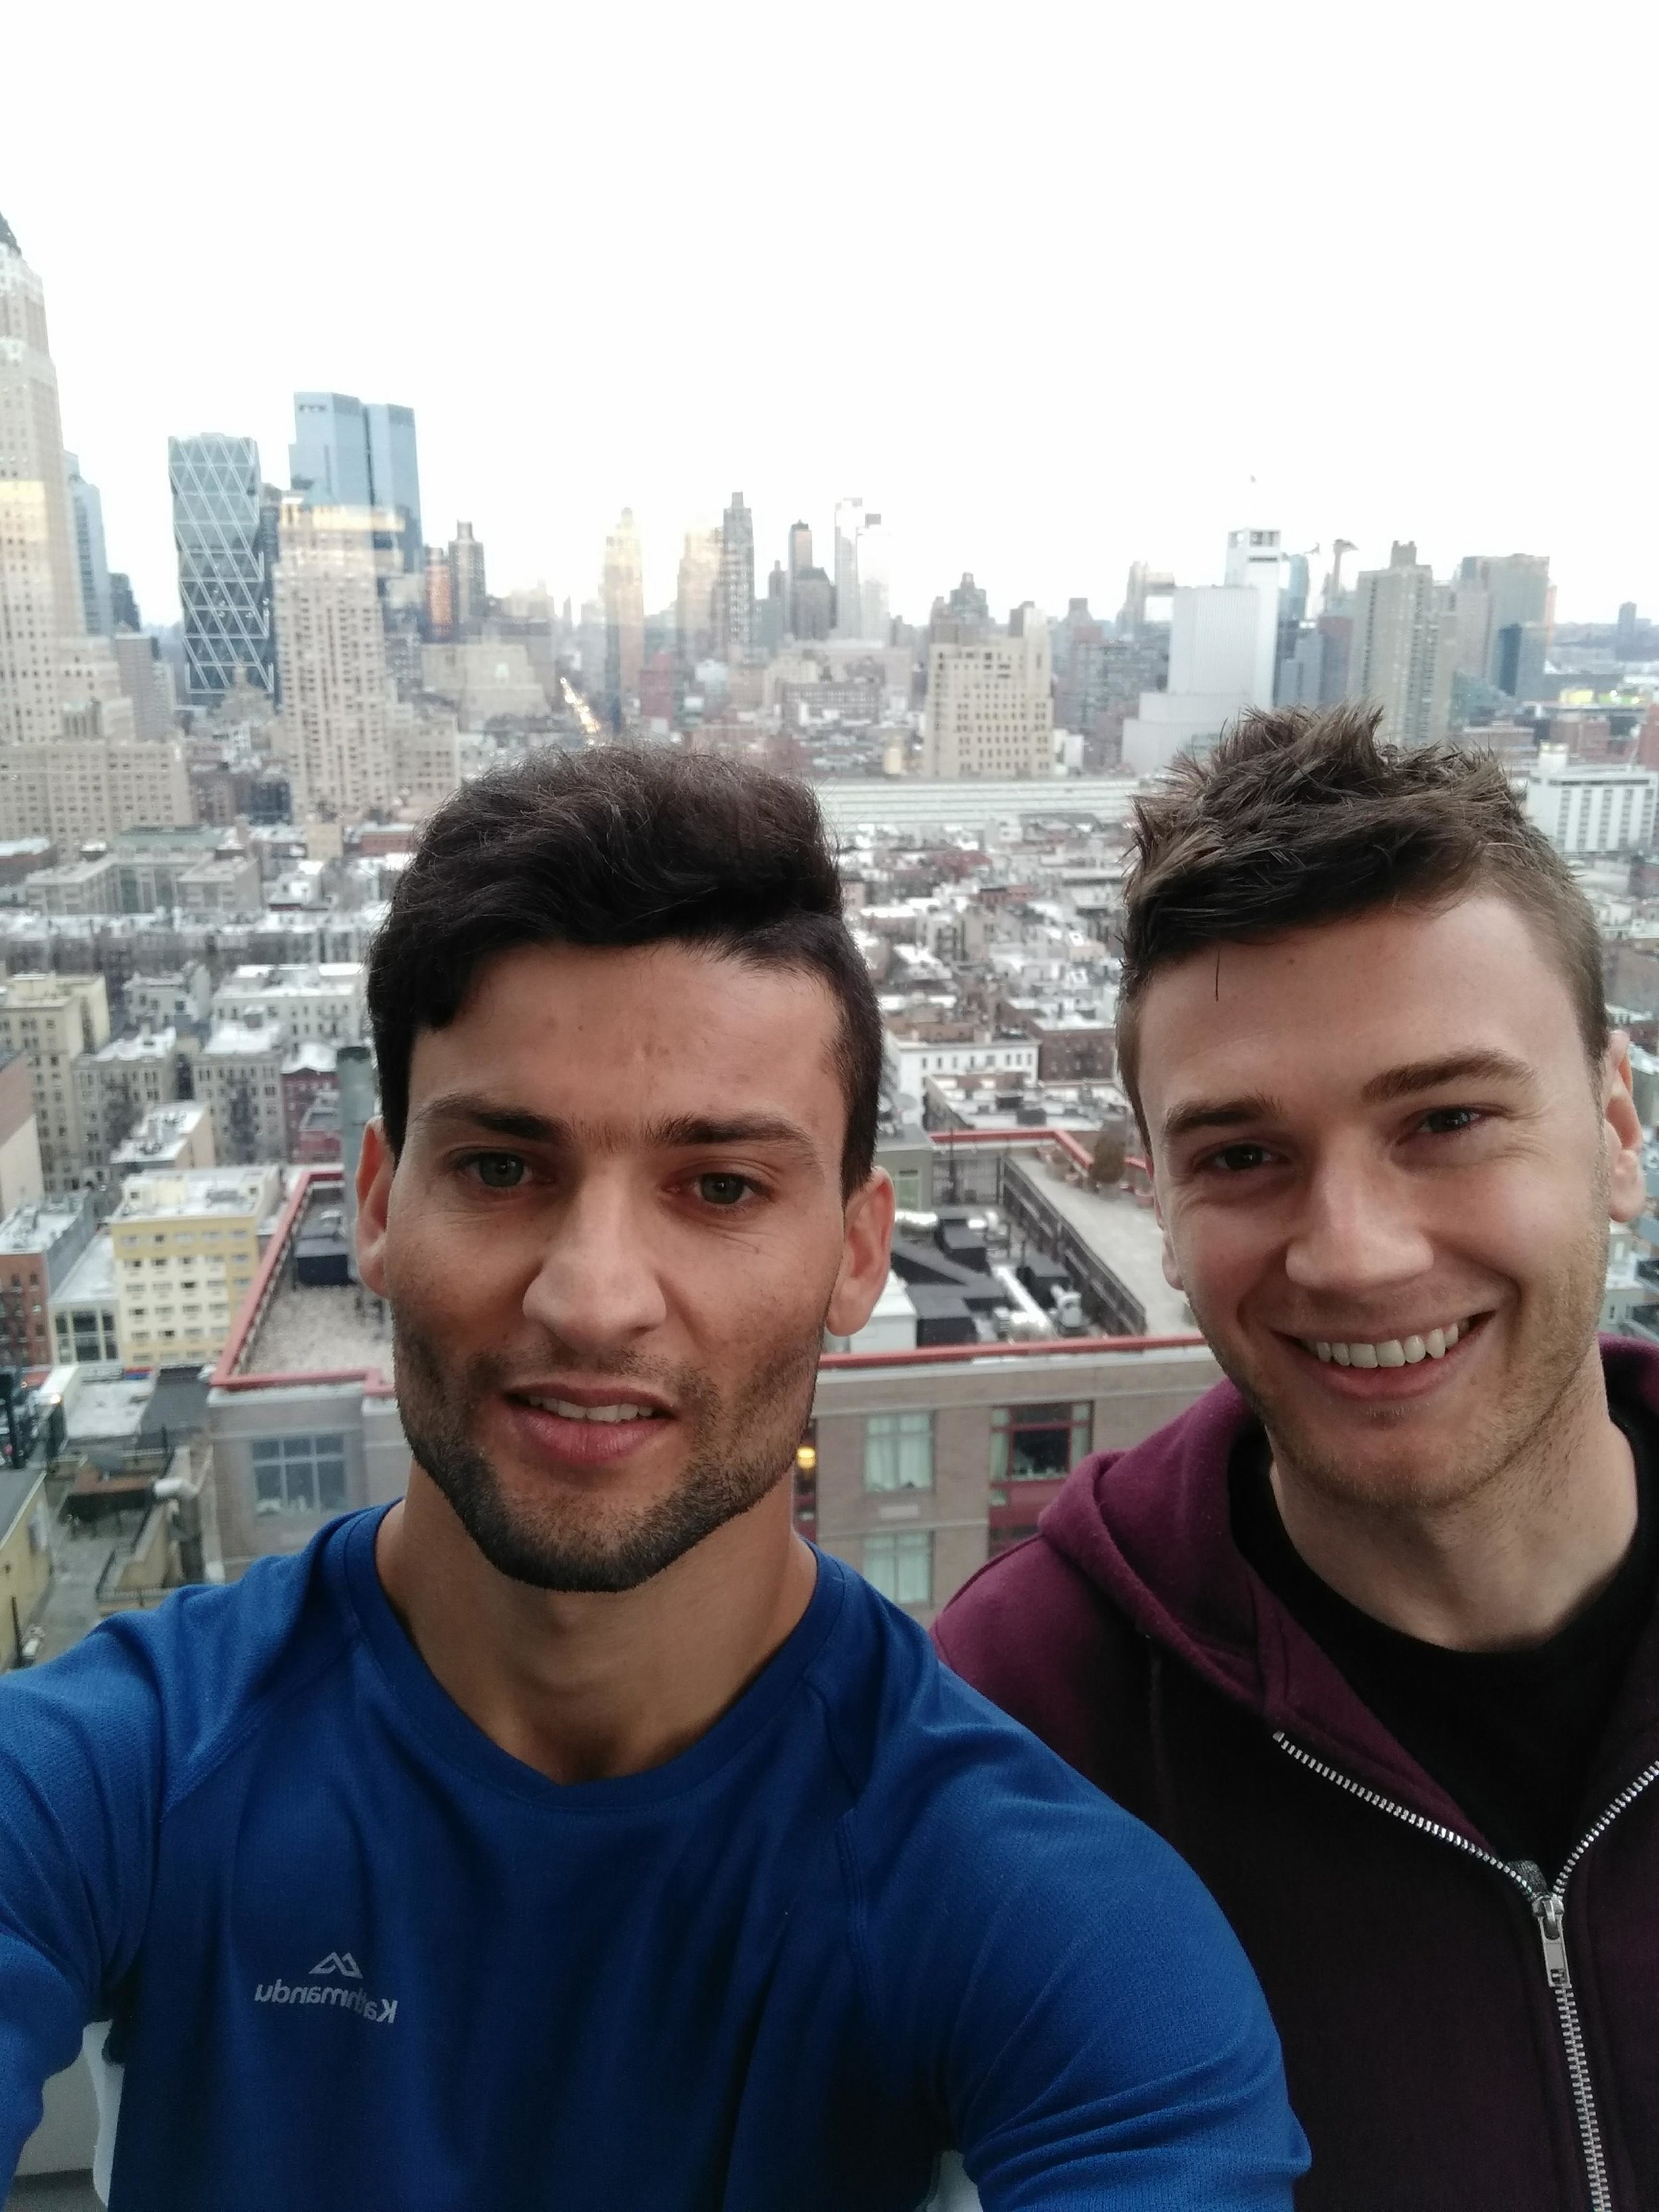 Ben and Shafiq meet in New York